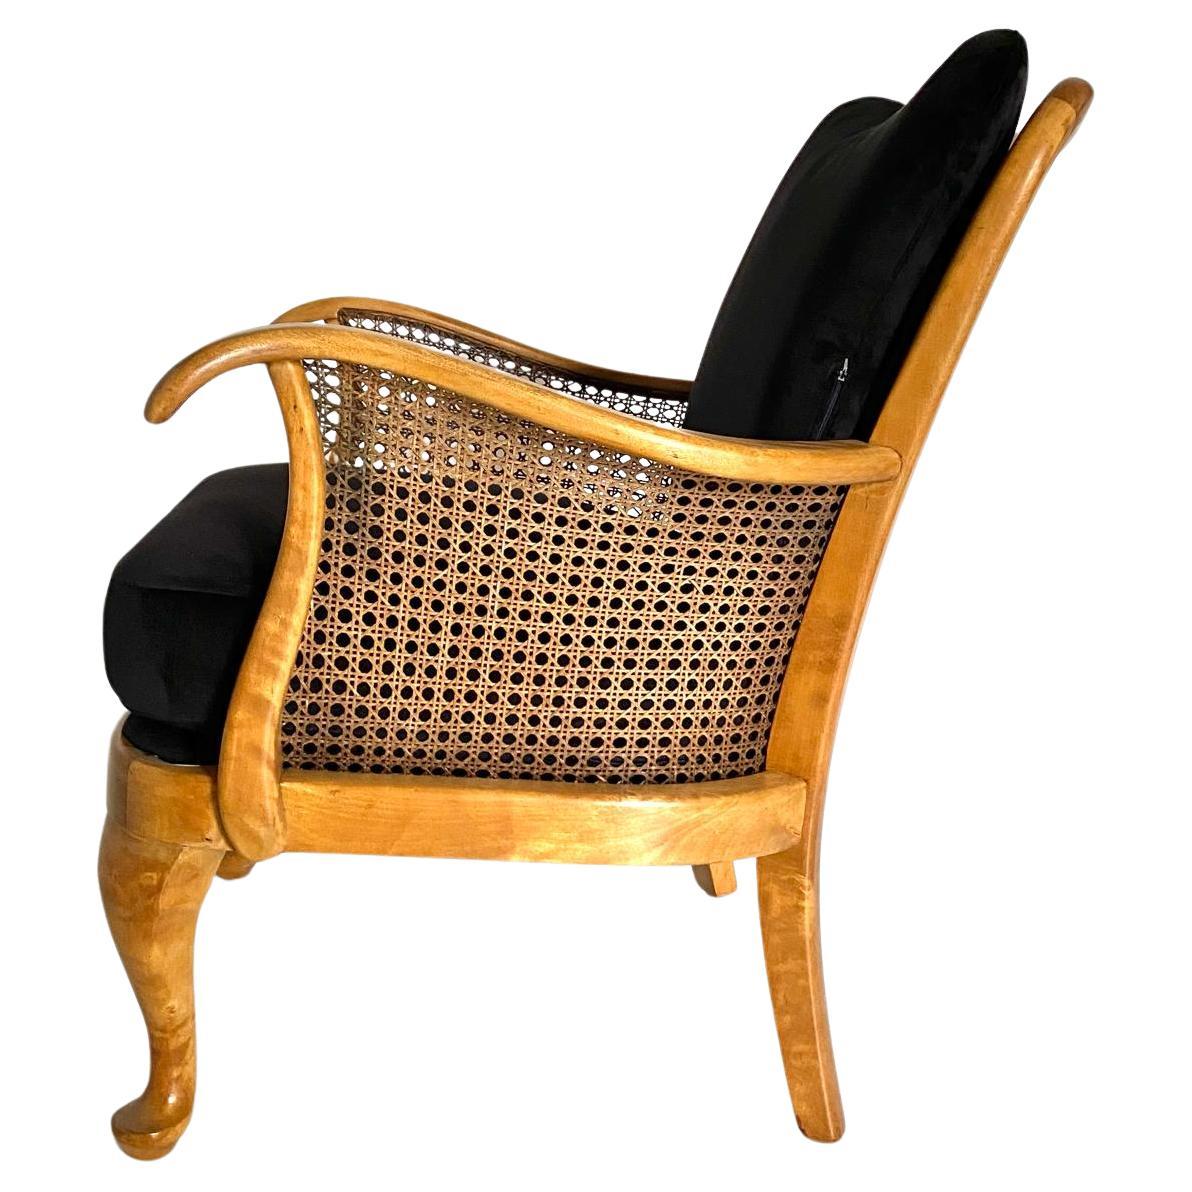 Rare classic art deco armchair produced in France in the 1930s. Beech bentwood frame with elegant cane on both the back seat and side sides. Black velvet upholstered seat and back cushions. Fully restored as follows: Beech wood has been treated,